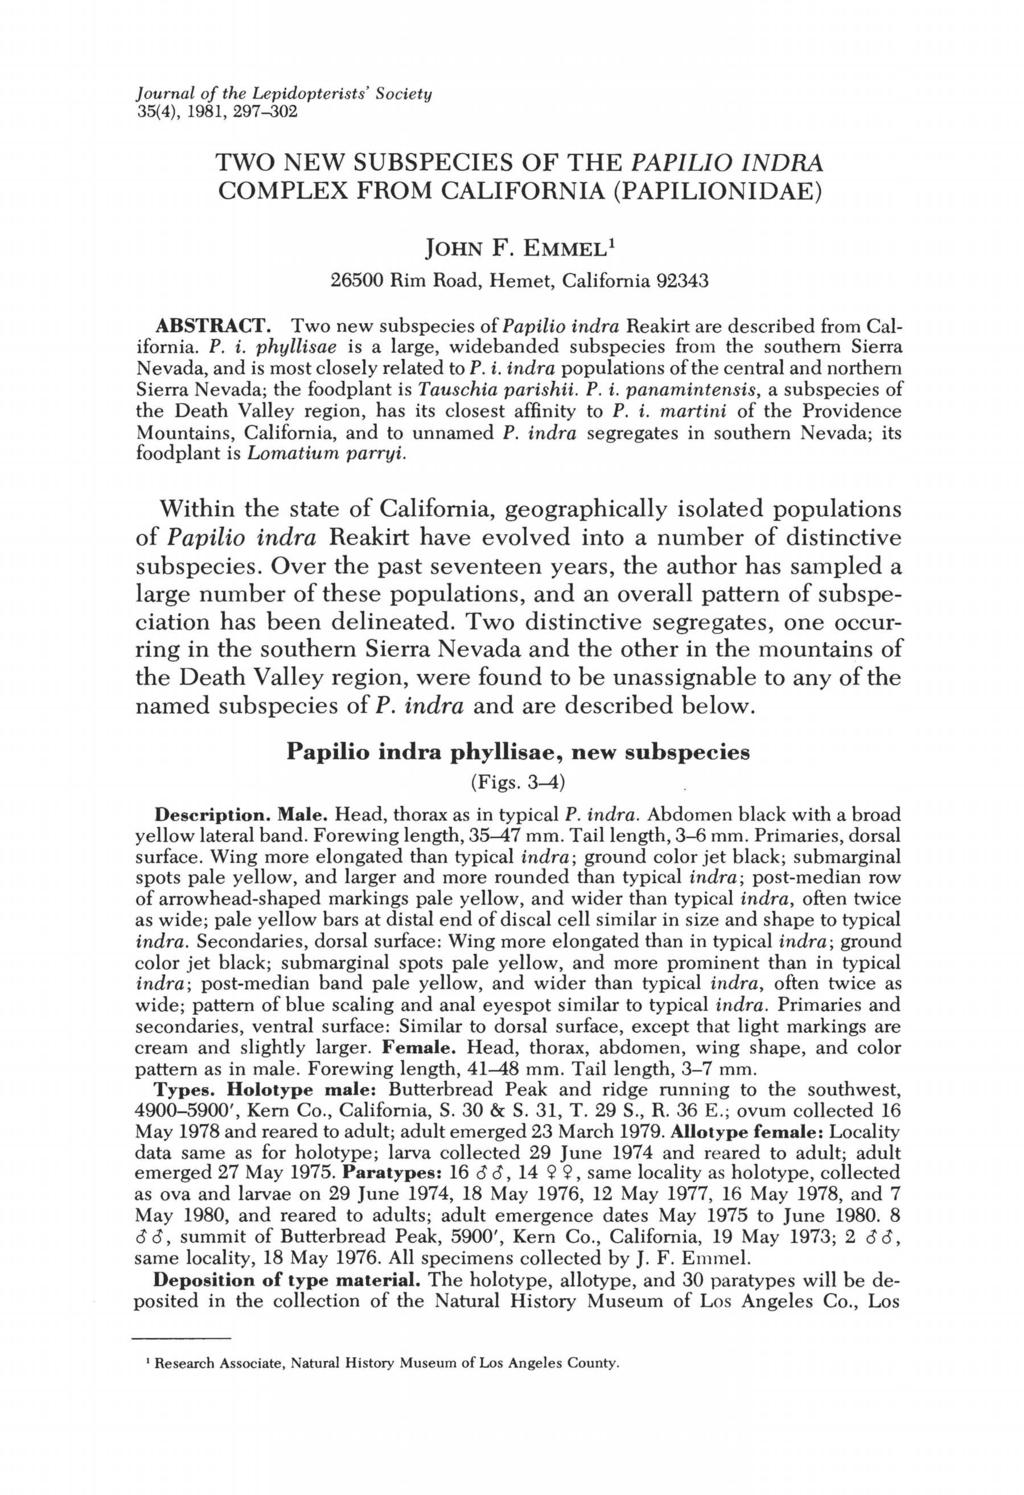 Journal of the Lepidopterists' Society 35(4), 1981,297--302 TWO NEW SUBSPECIES OF THE PAPILlO INDRA COMPLEX FROM CALIFORNIA (PAPILIONIDAE) JOHN F.